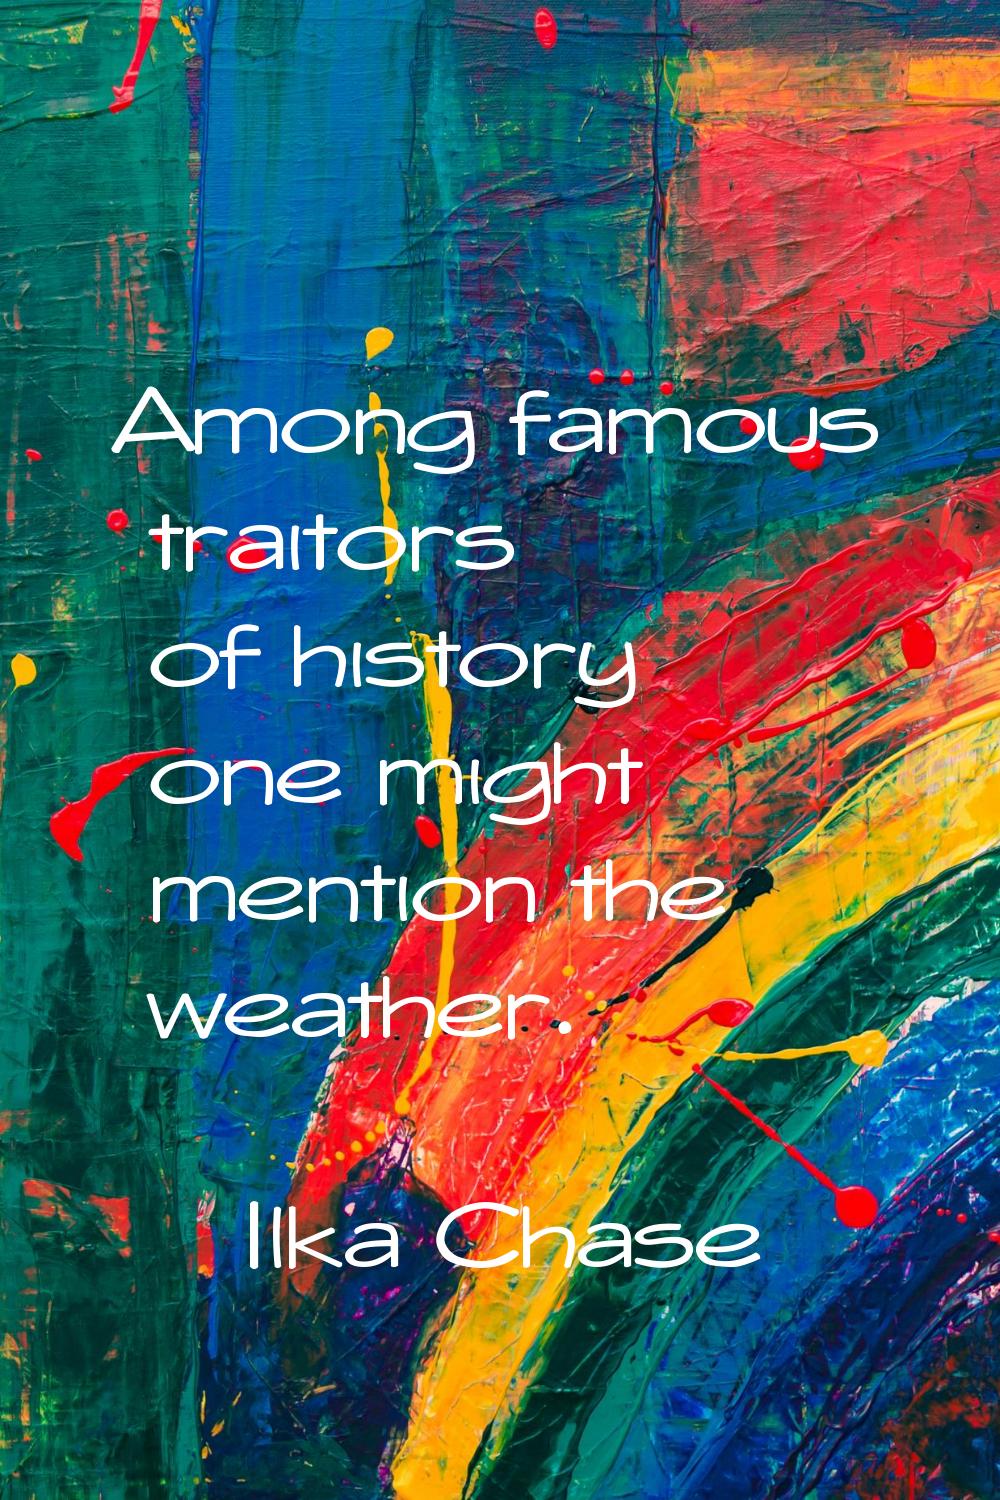 Among famous traitors of history one might mention the weather.